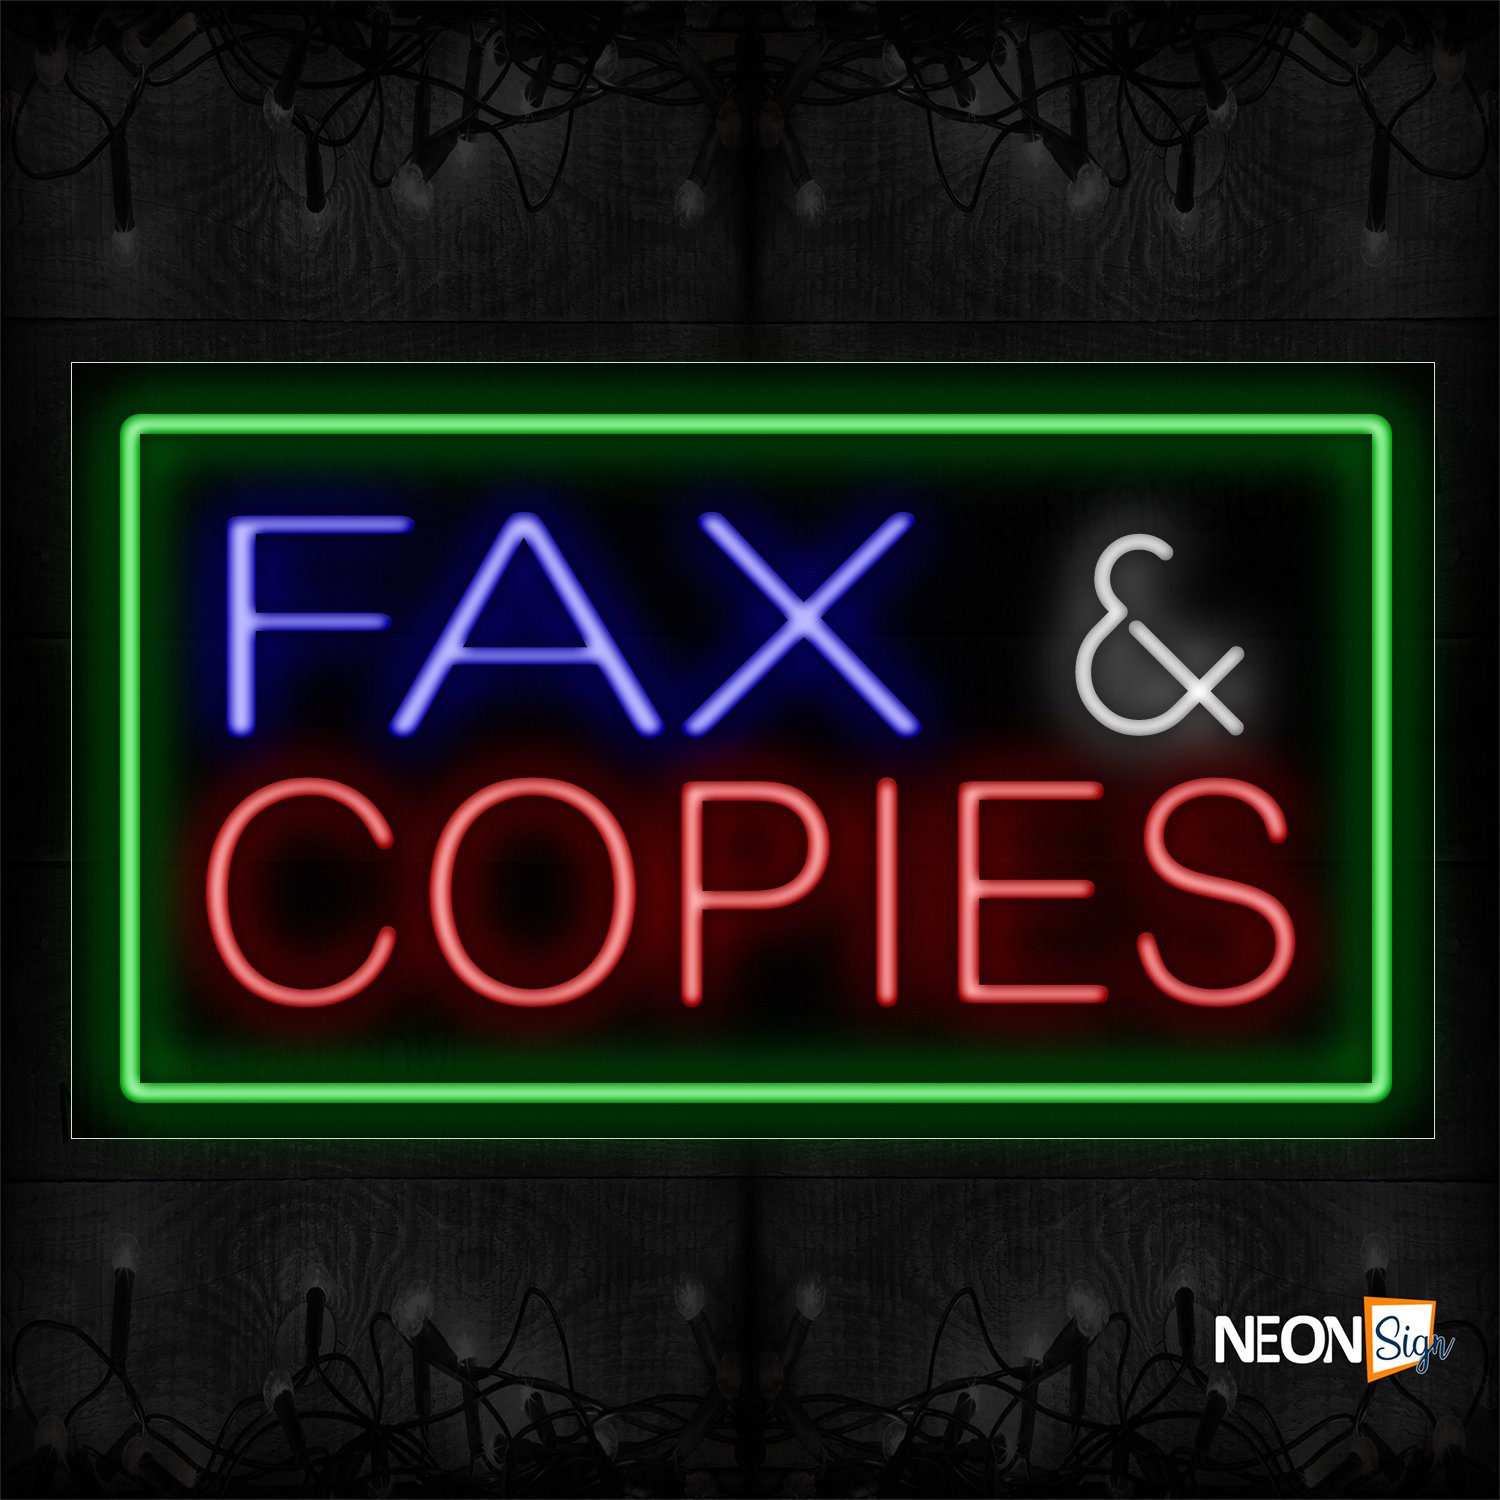 Image of 11075 Fax & Copies With Border Neon Signs_20x37 Black Backing